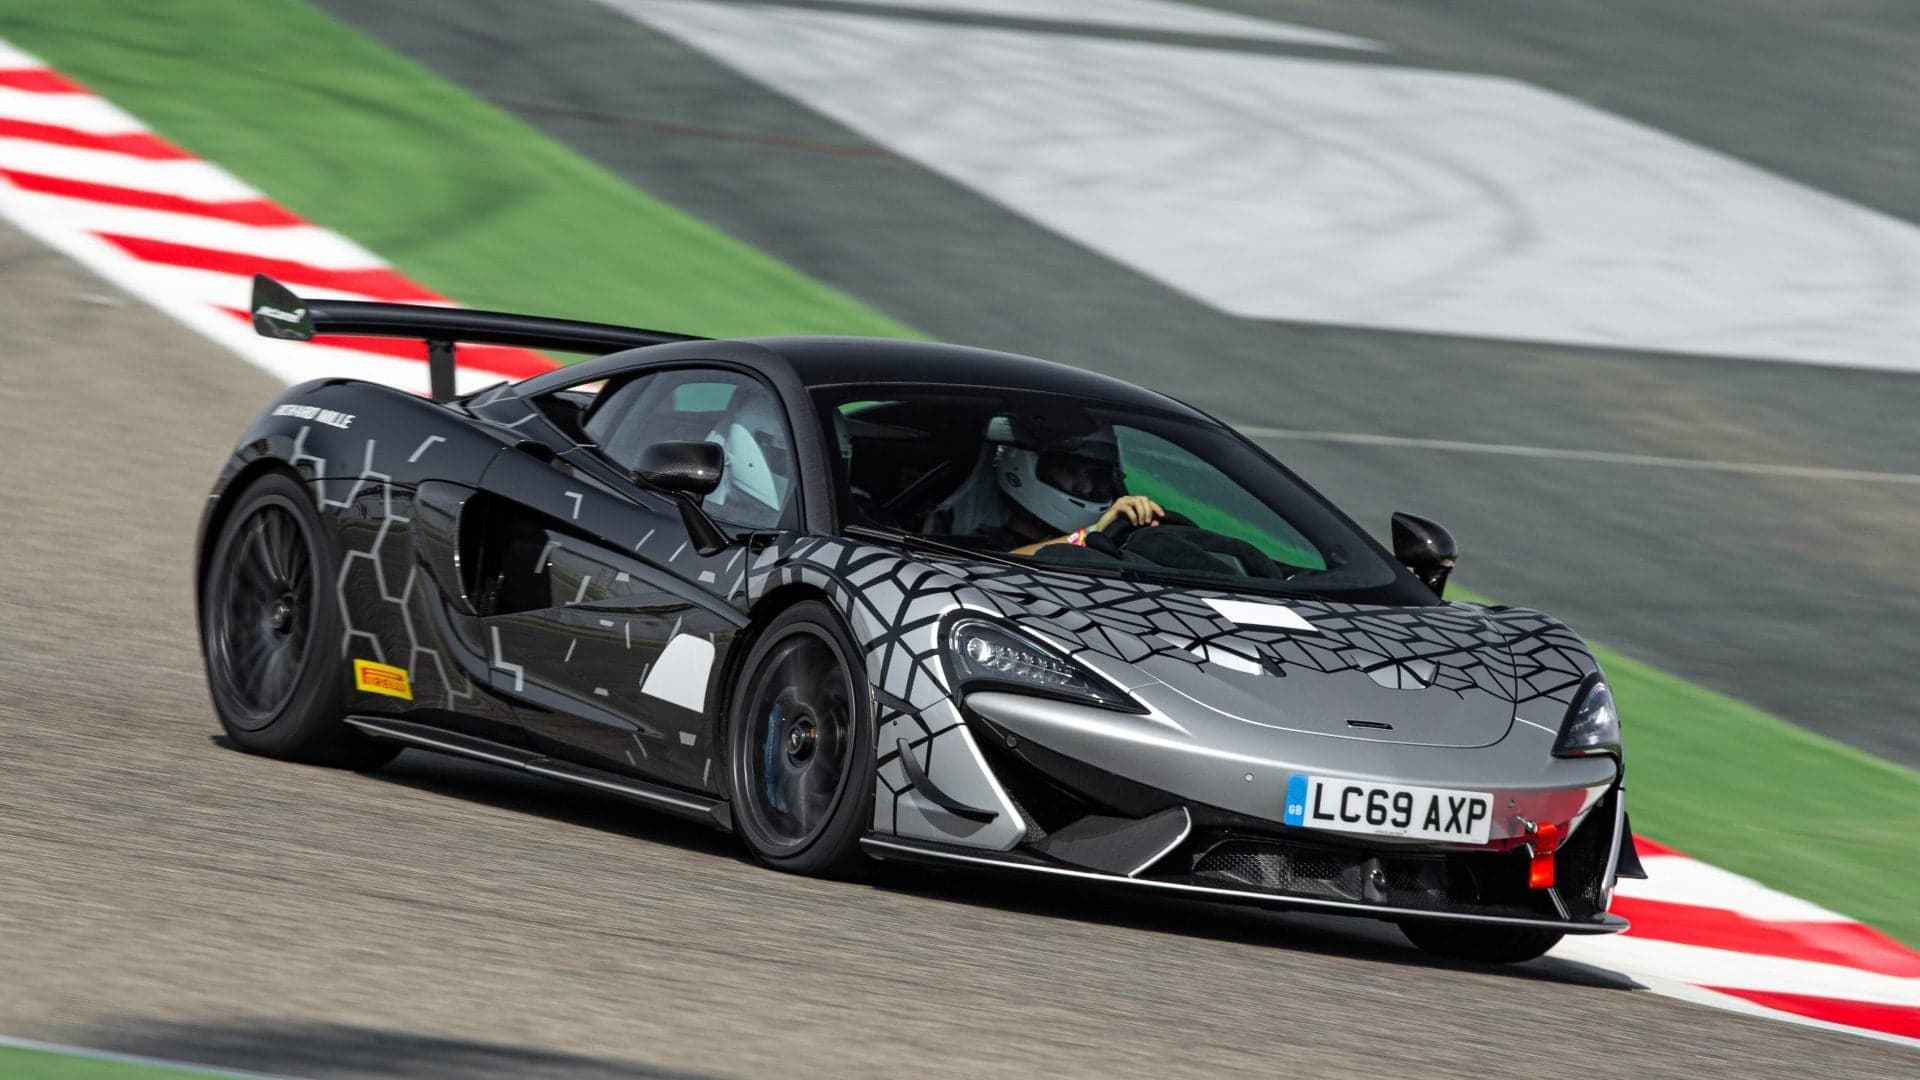 The New McLaren 620R Is a 611-HP, $300,000 GT4 Racer for the Streets